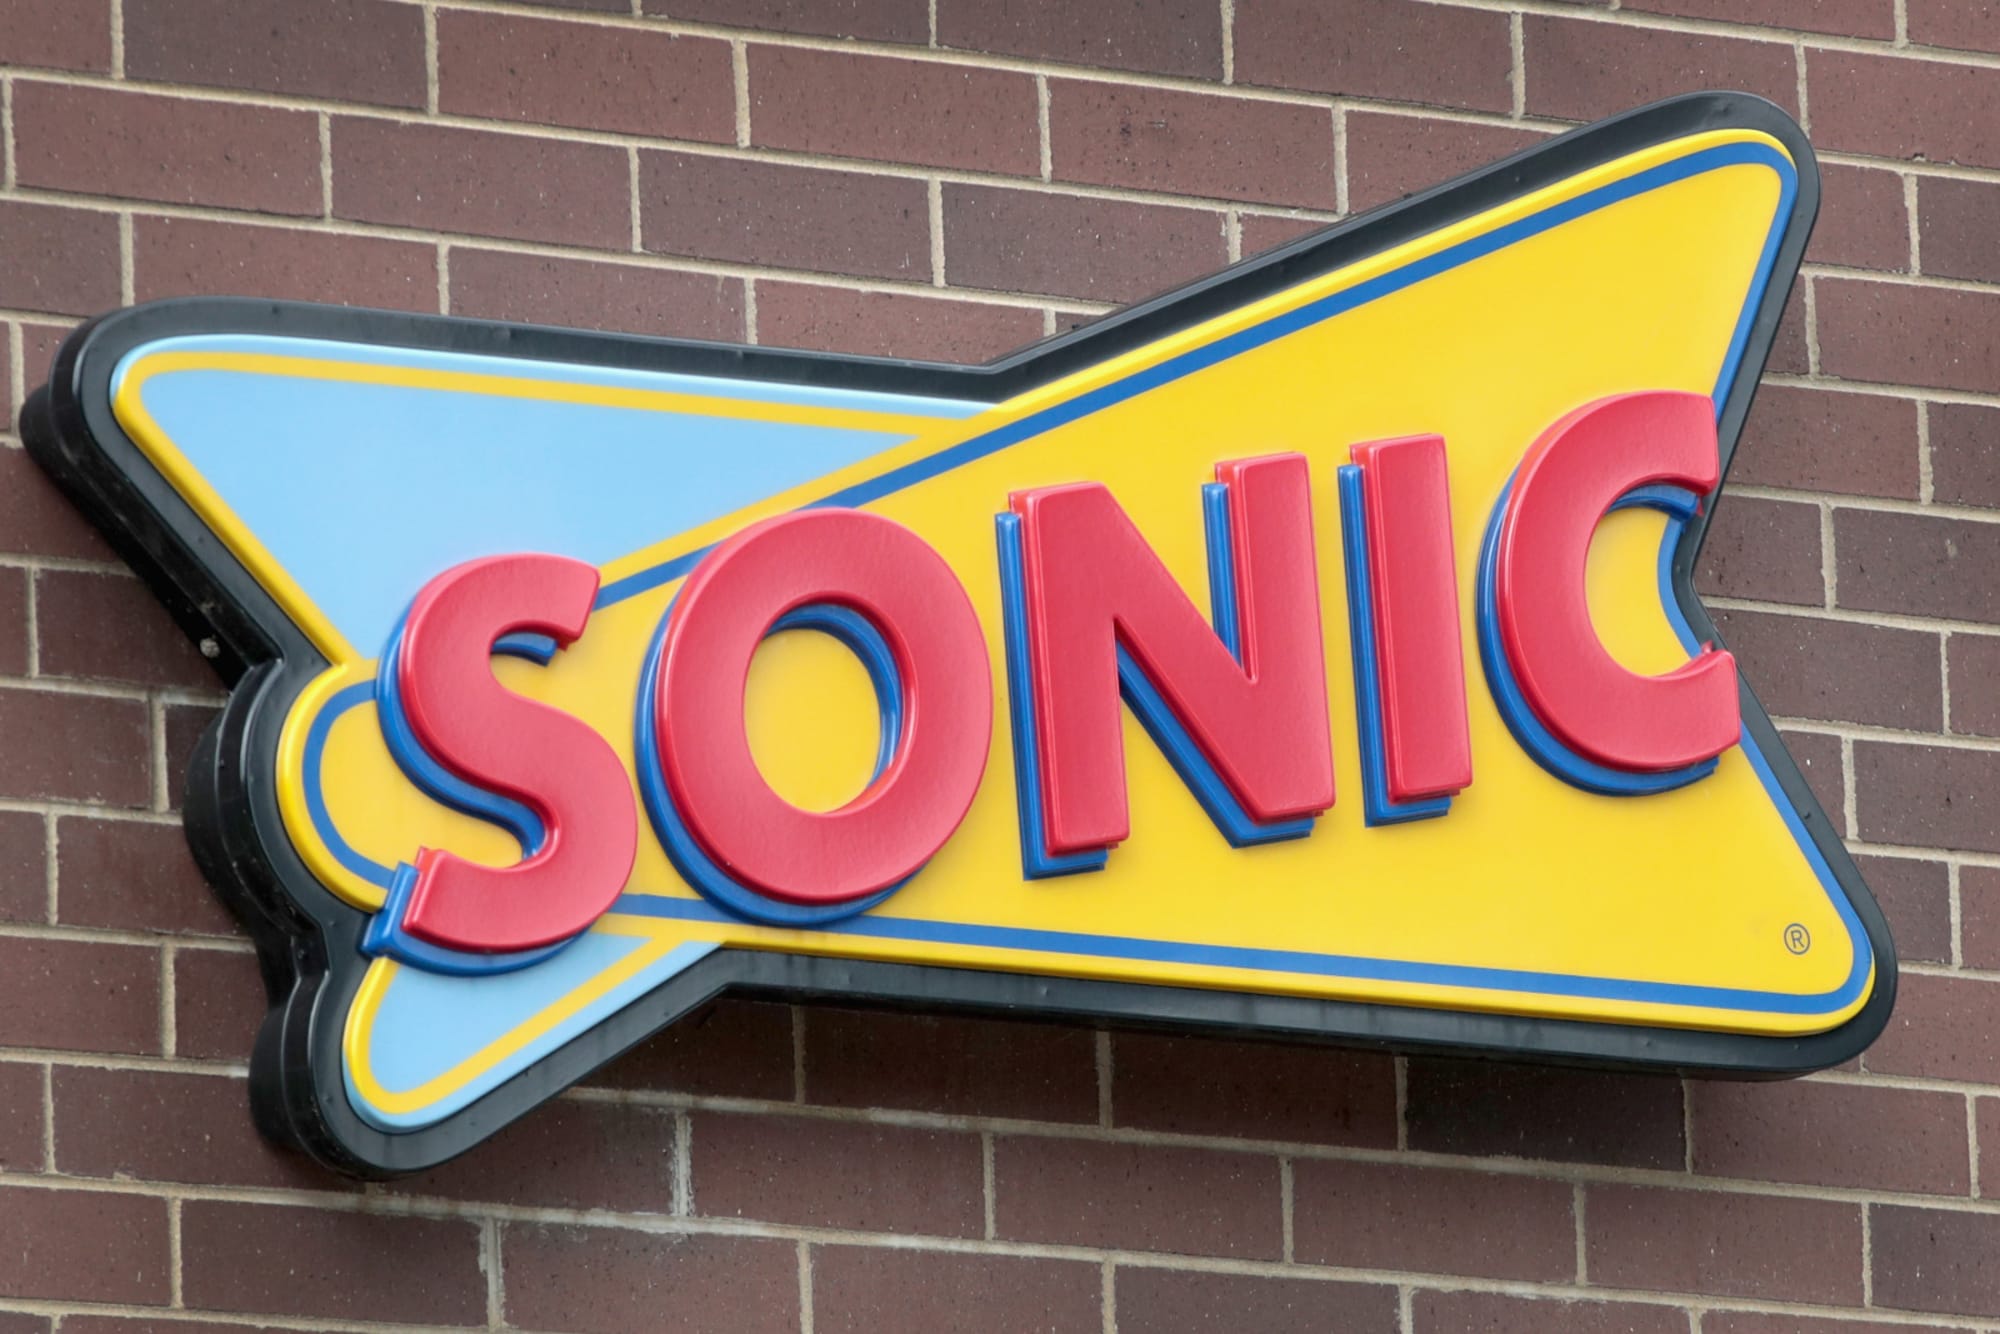 SONIC Announces New Summer Snacking Menu and Returning Fan